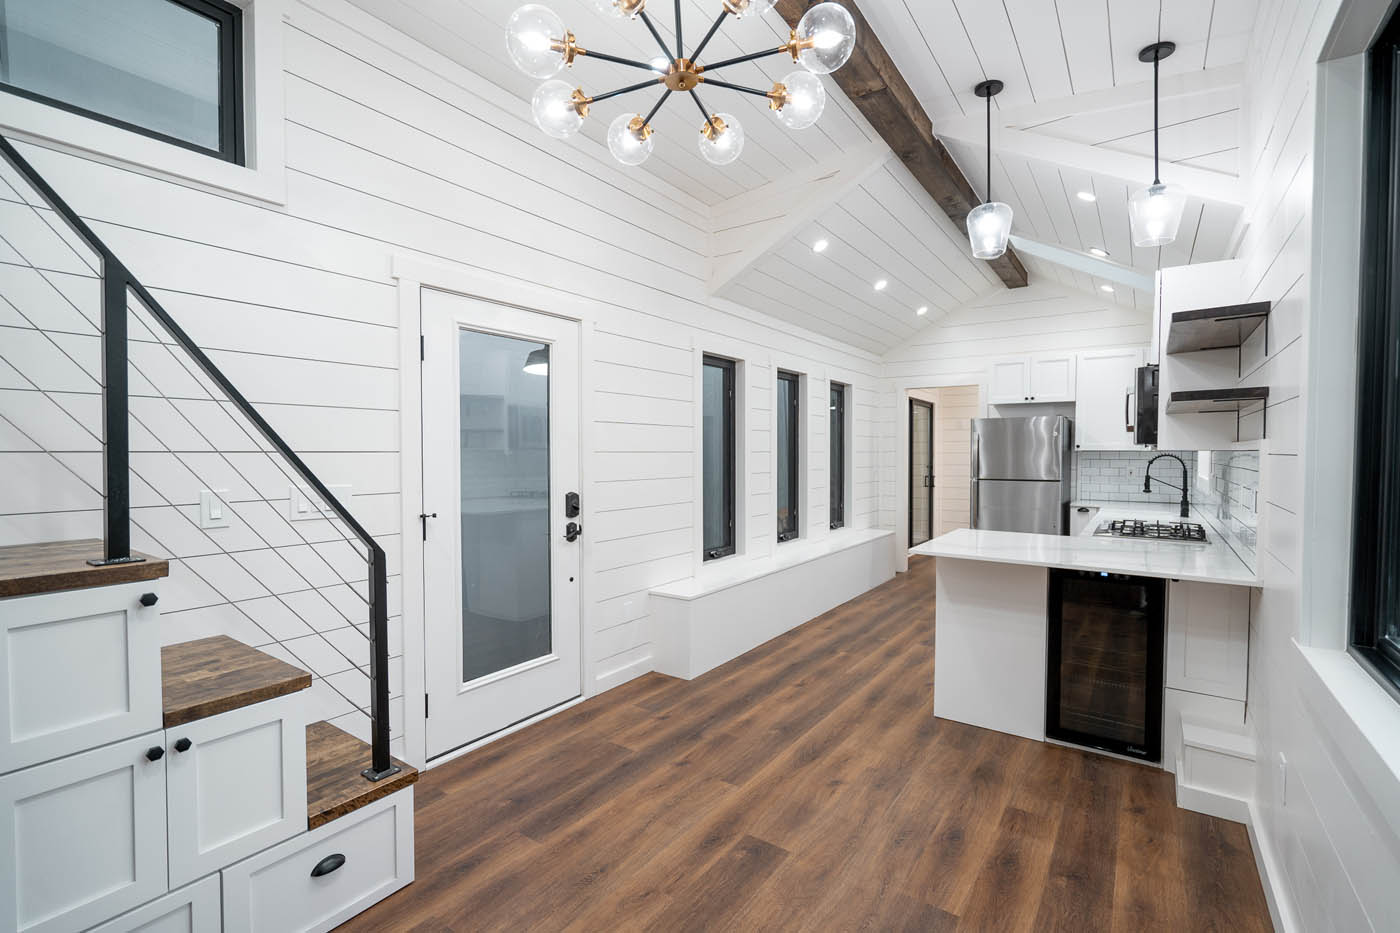 A modern home with dark floors and white kitchen cabinets, provided by one of the best San Antonio tiny house companies.